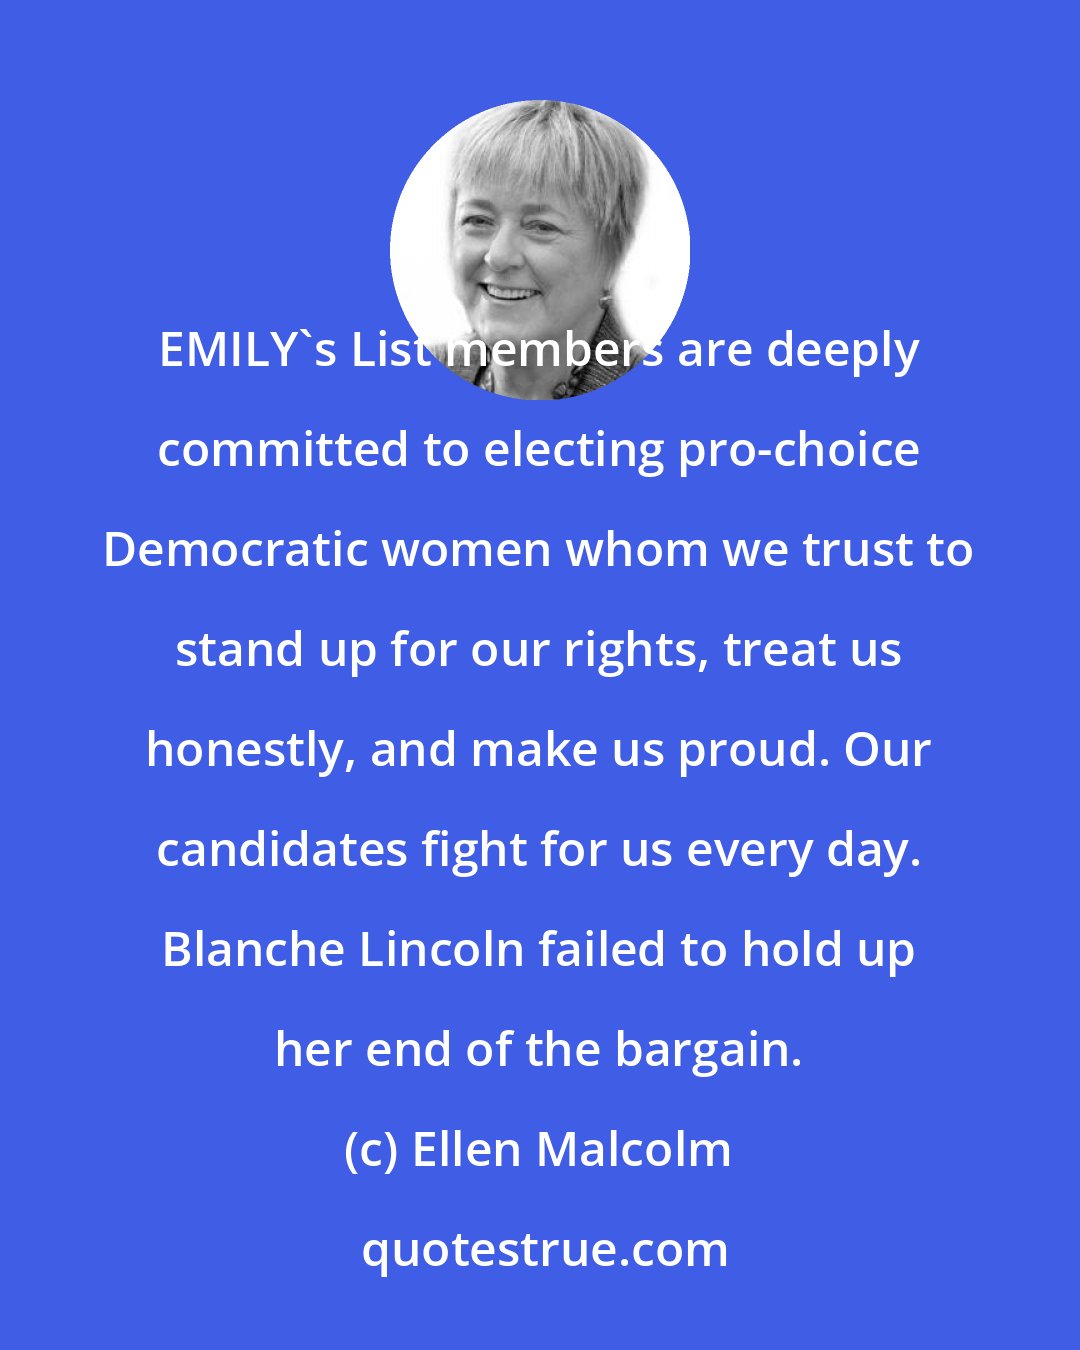 Ellen Malcolm: EMILY's List members are deeply committed to electing pro-choice Democratic women whom we trust to stand up for our rights, treat us honestly, and make us proud. Our candidates fight for us every day. Blanche Lincoln failed to hold up her end of the bargain.